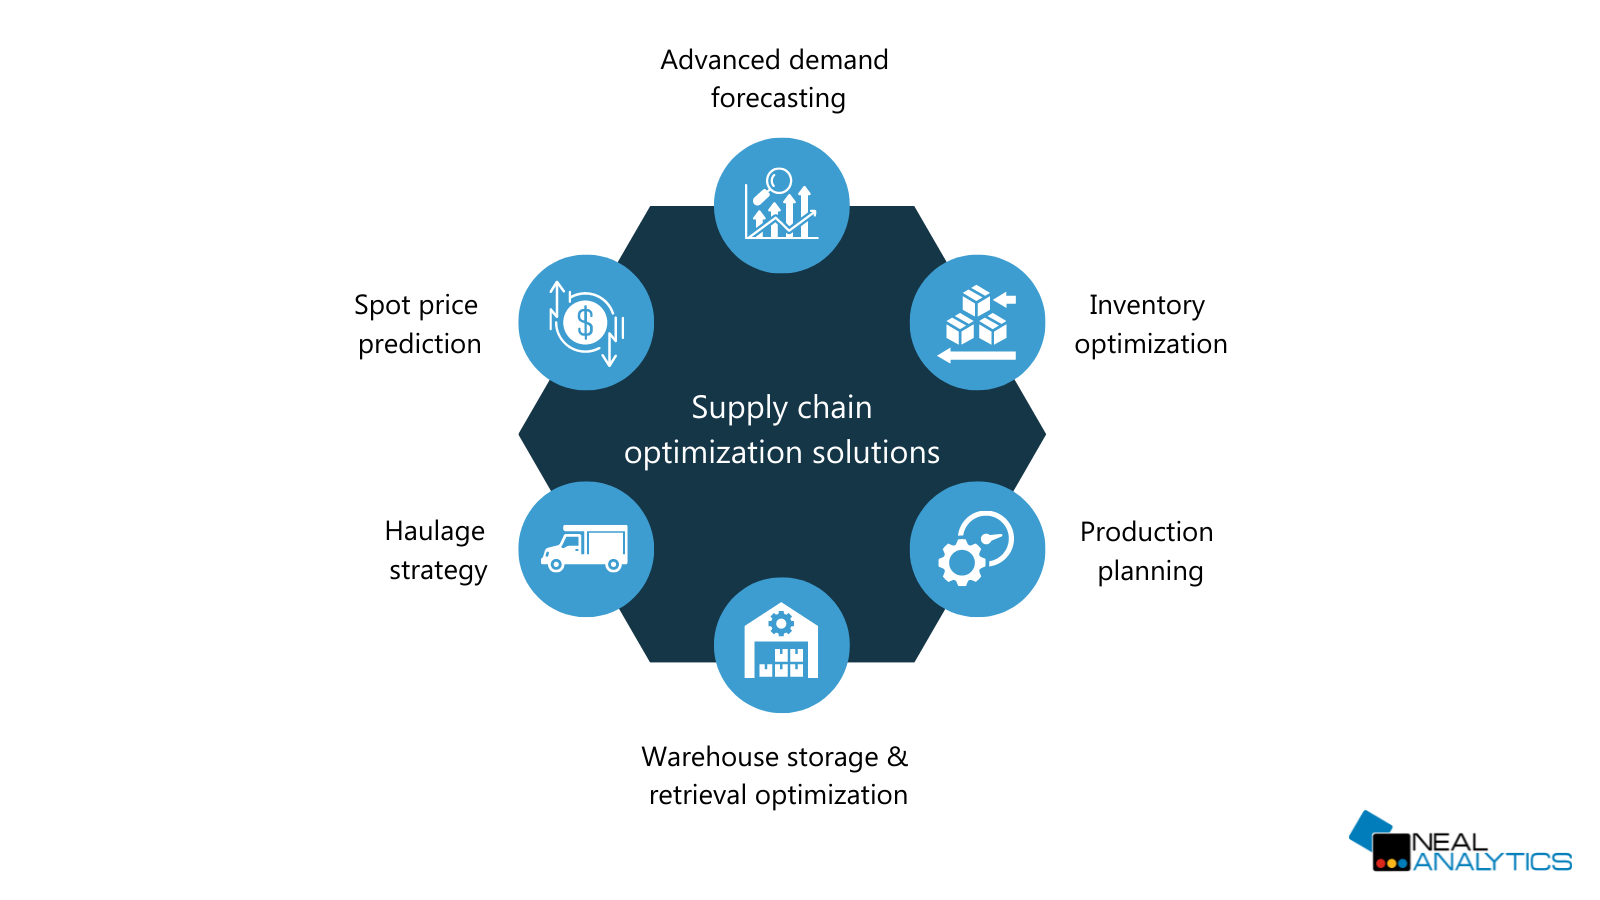 Supply chain optimization solutions